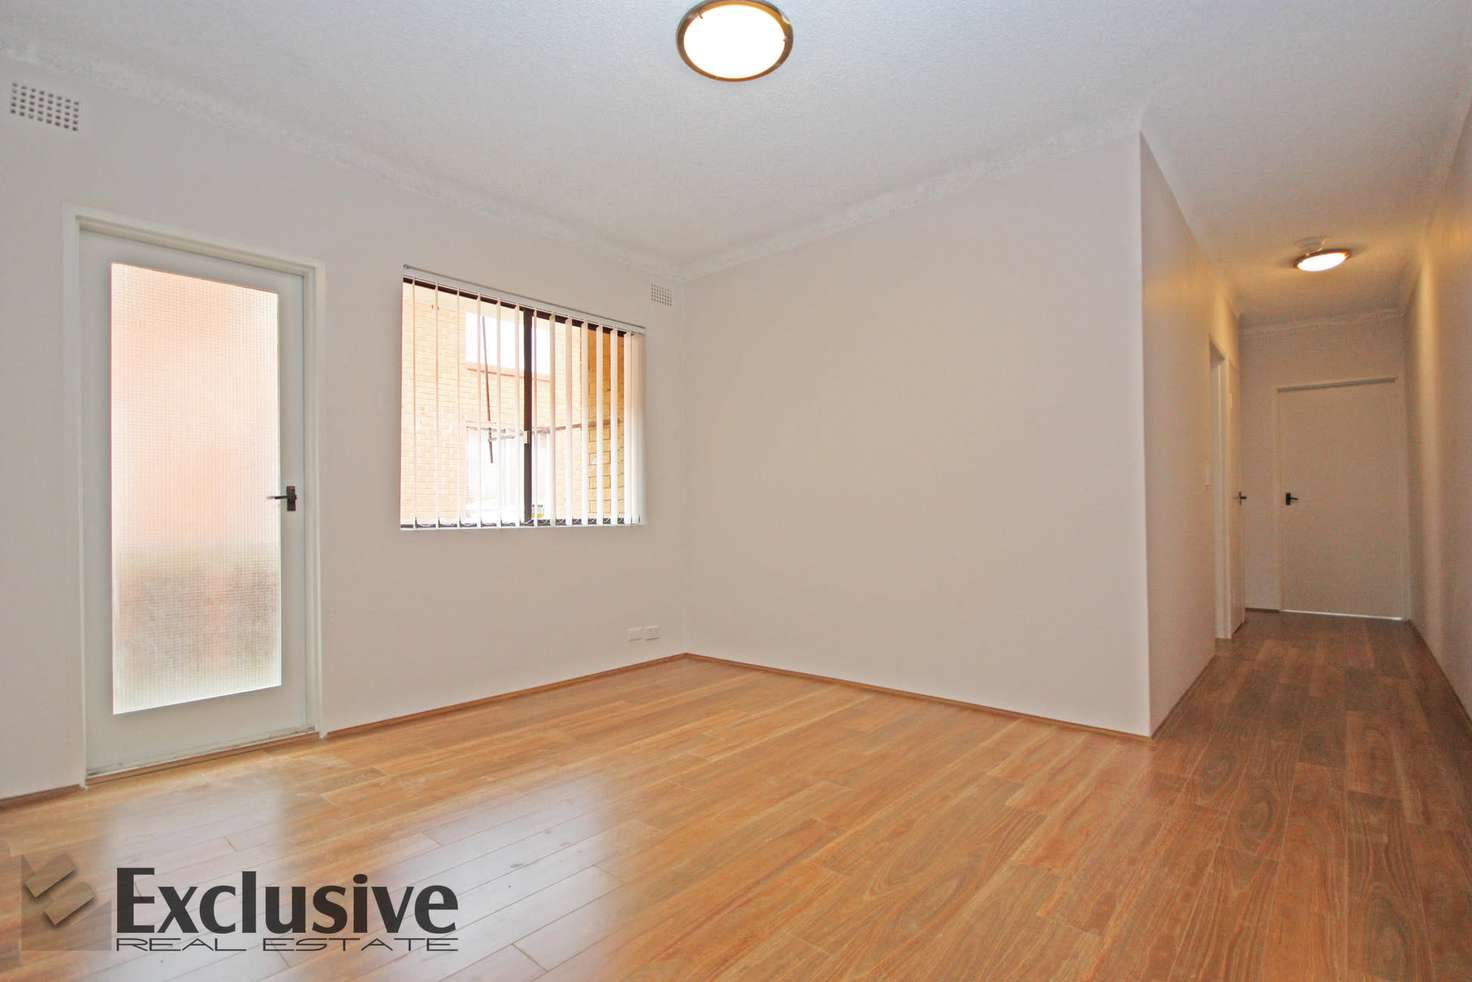 Main view of Homely apartment listing, 7/75 Harris Street, Fairfield NSW 2165